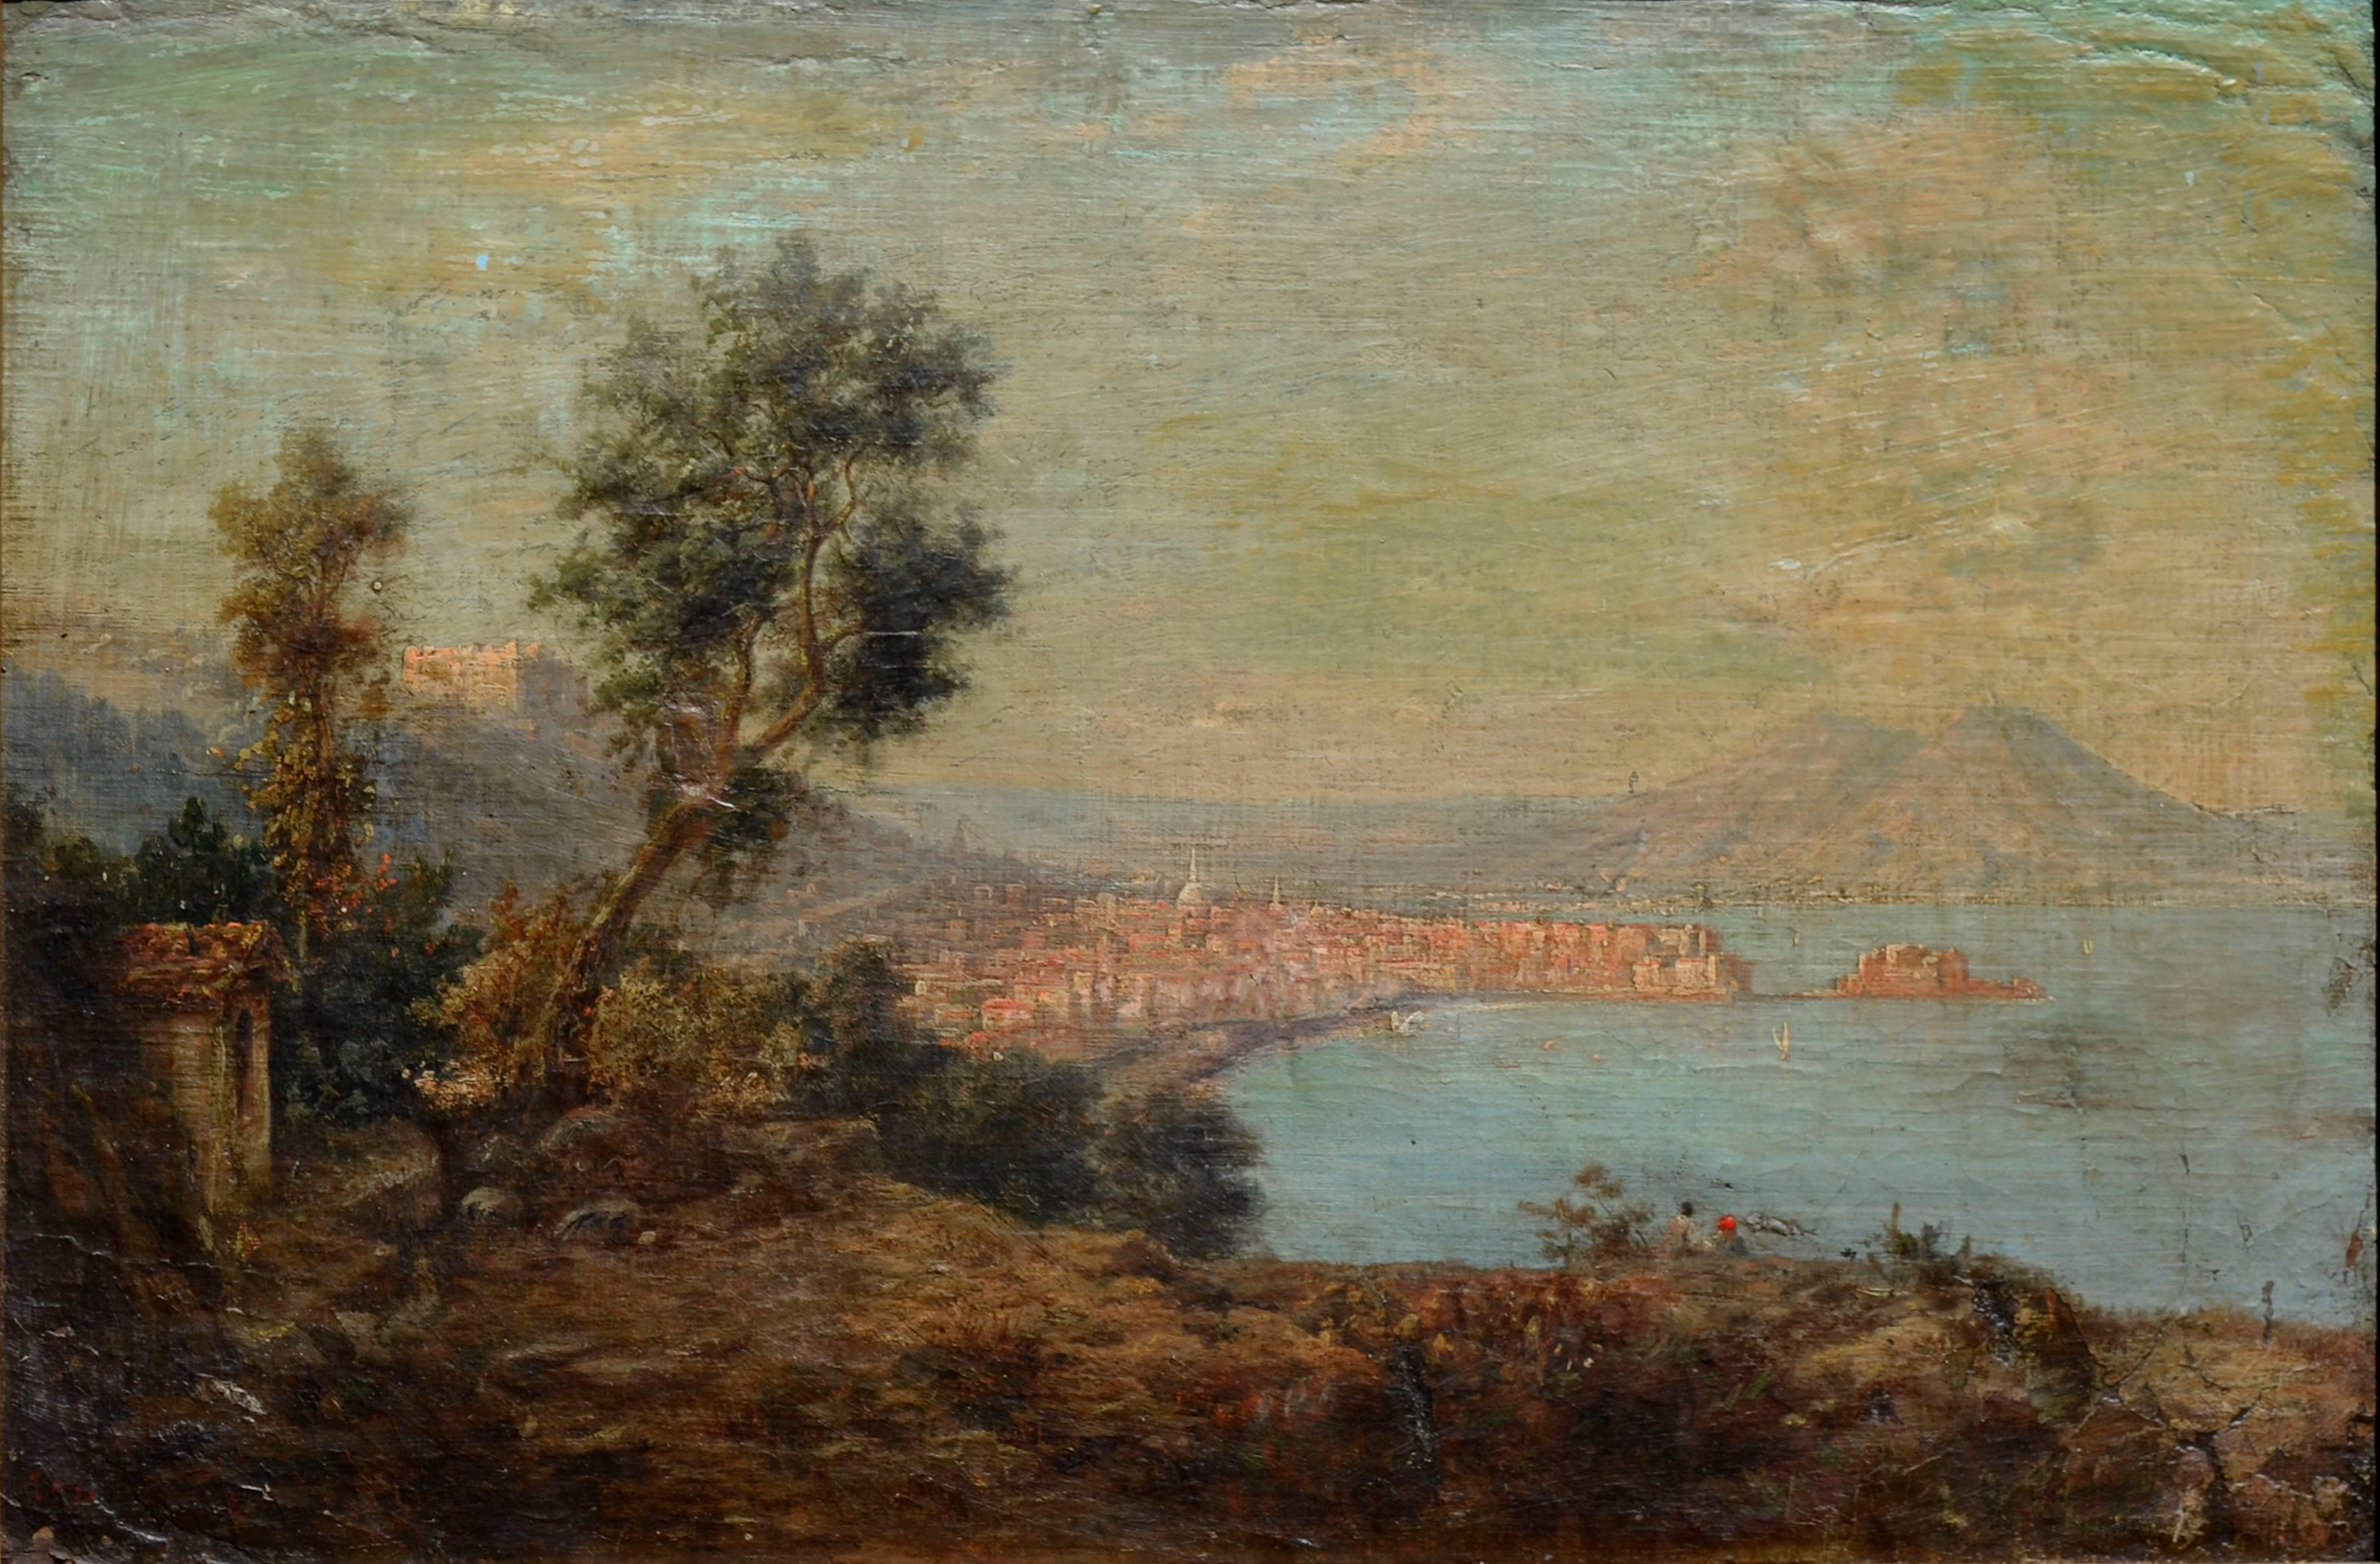 Environs of Naples - Painting by J.O. de Mogtaland